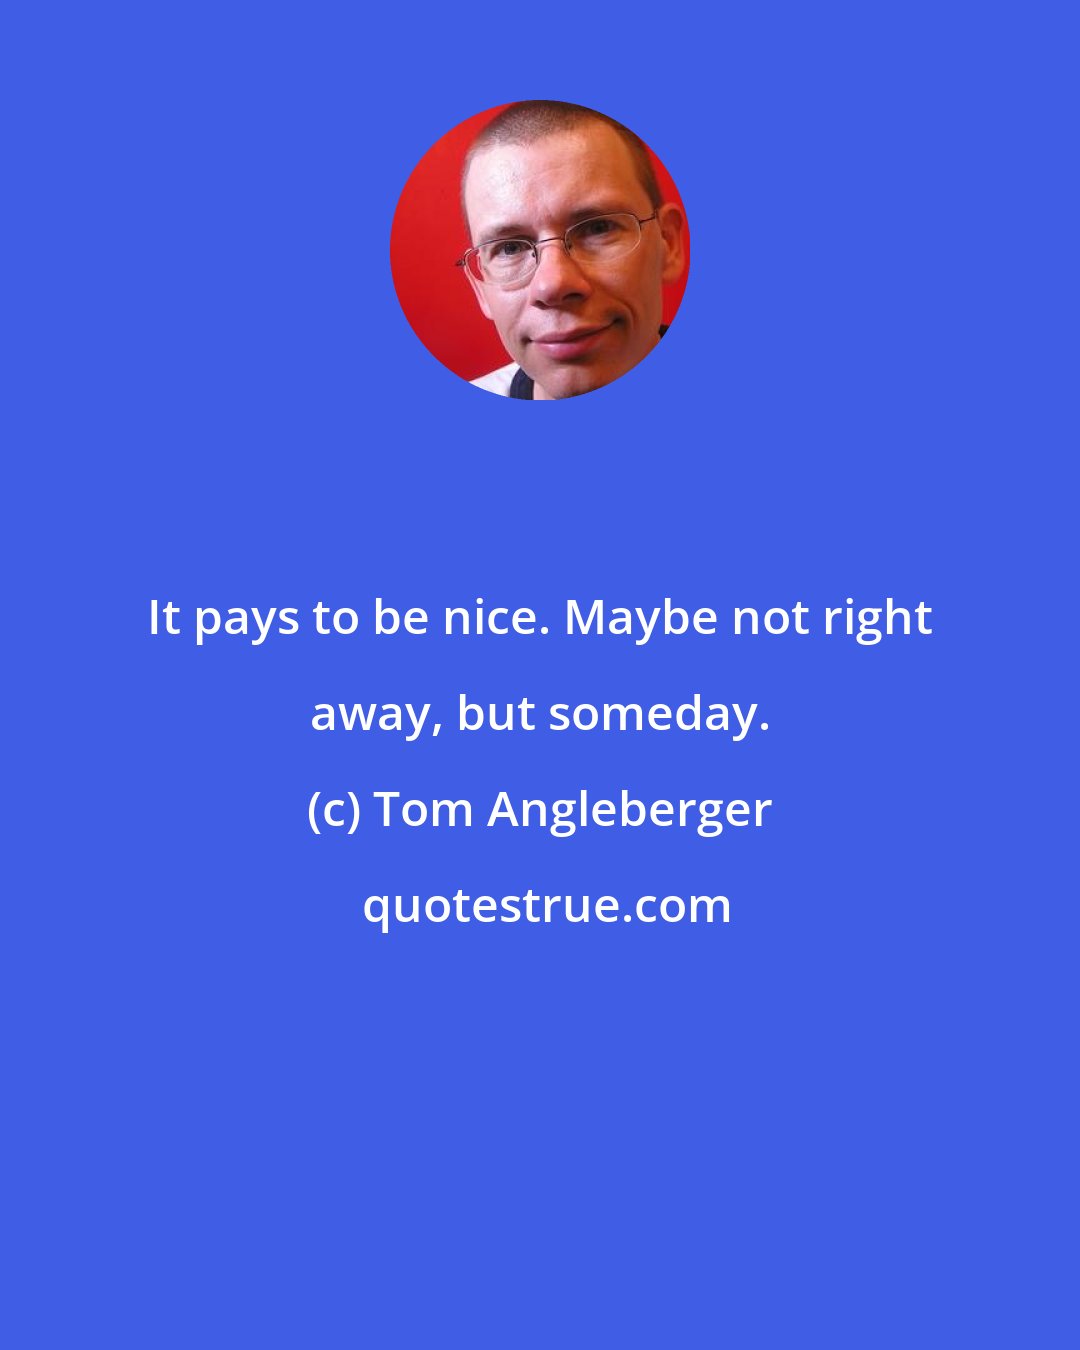 Tom Angleberger: It pays to be nice. Maybe not right away, but someday.